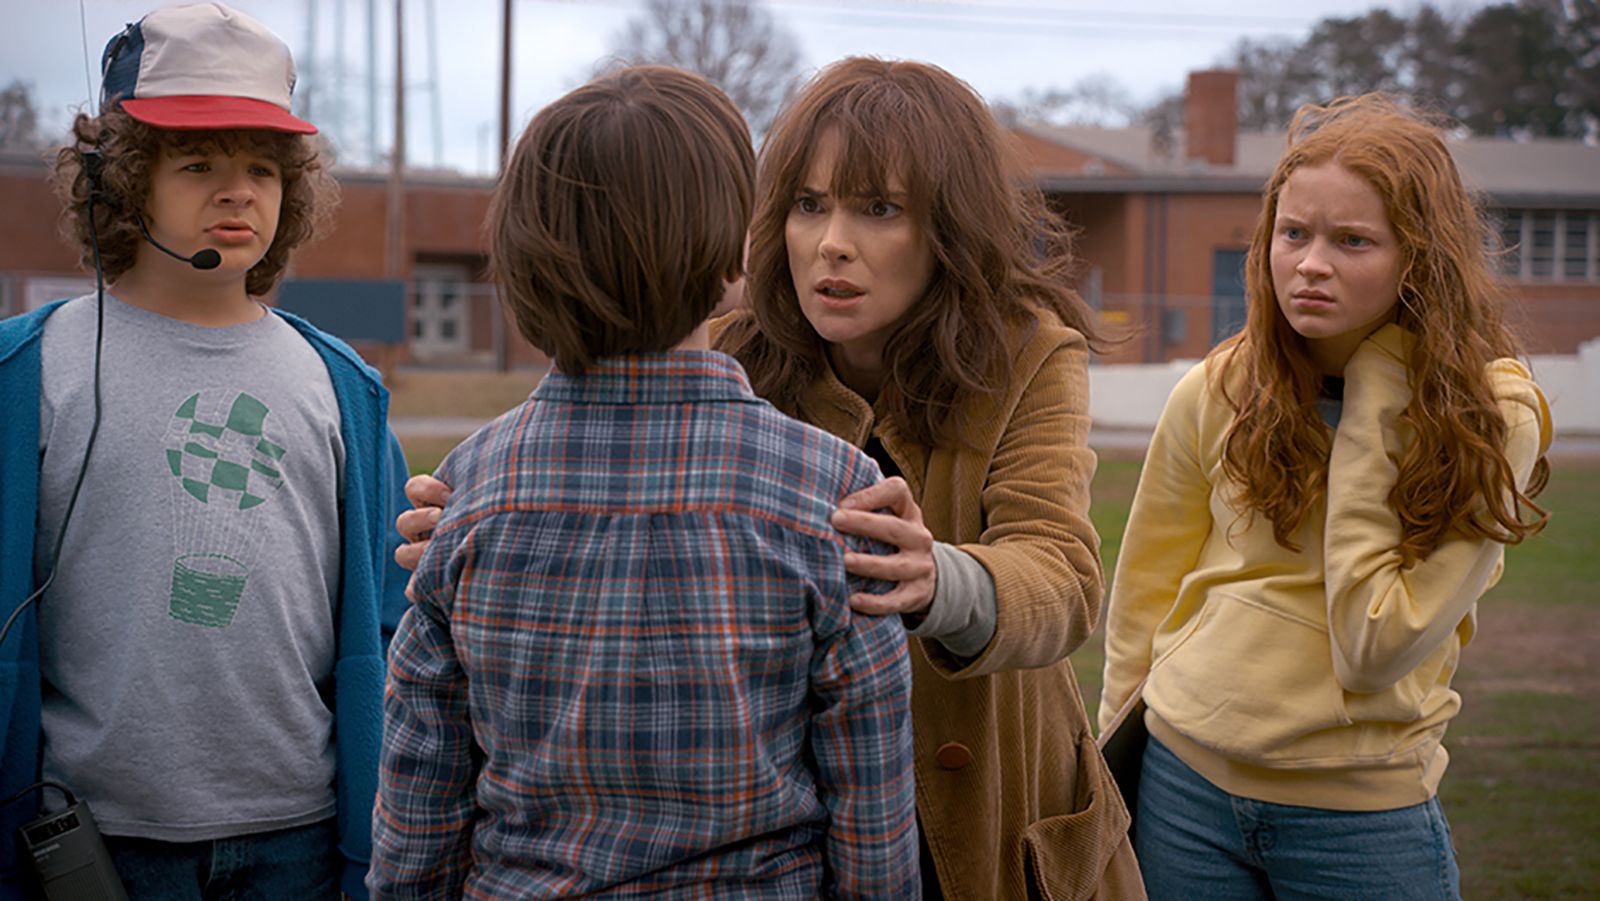 Stranger Things' Season 3 is about to drop and here's a refresher